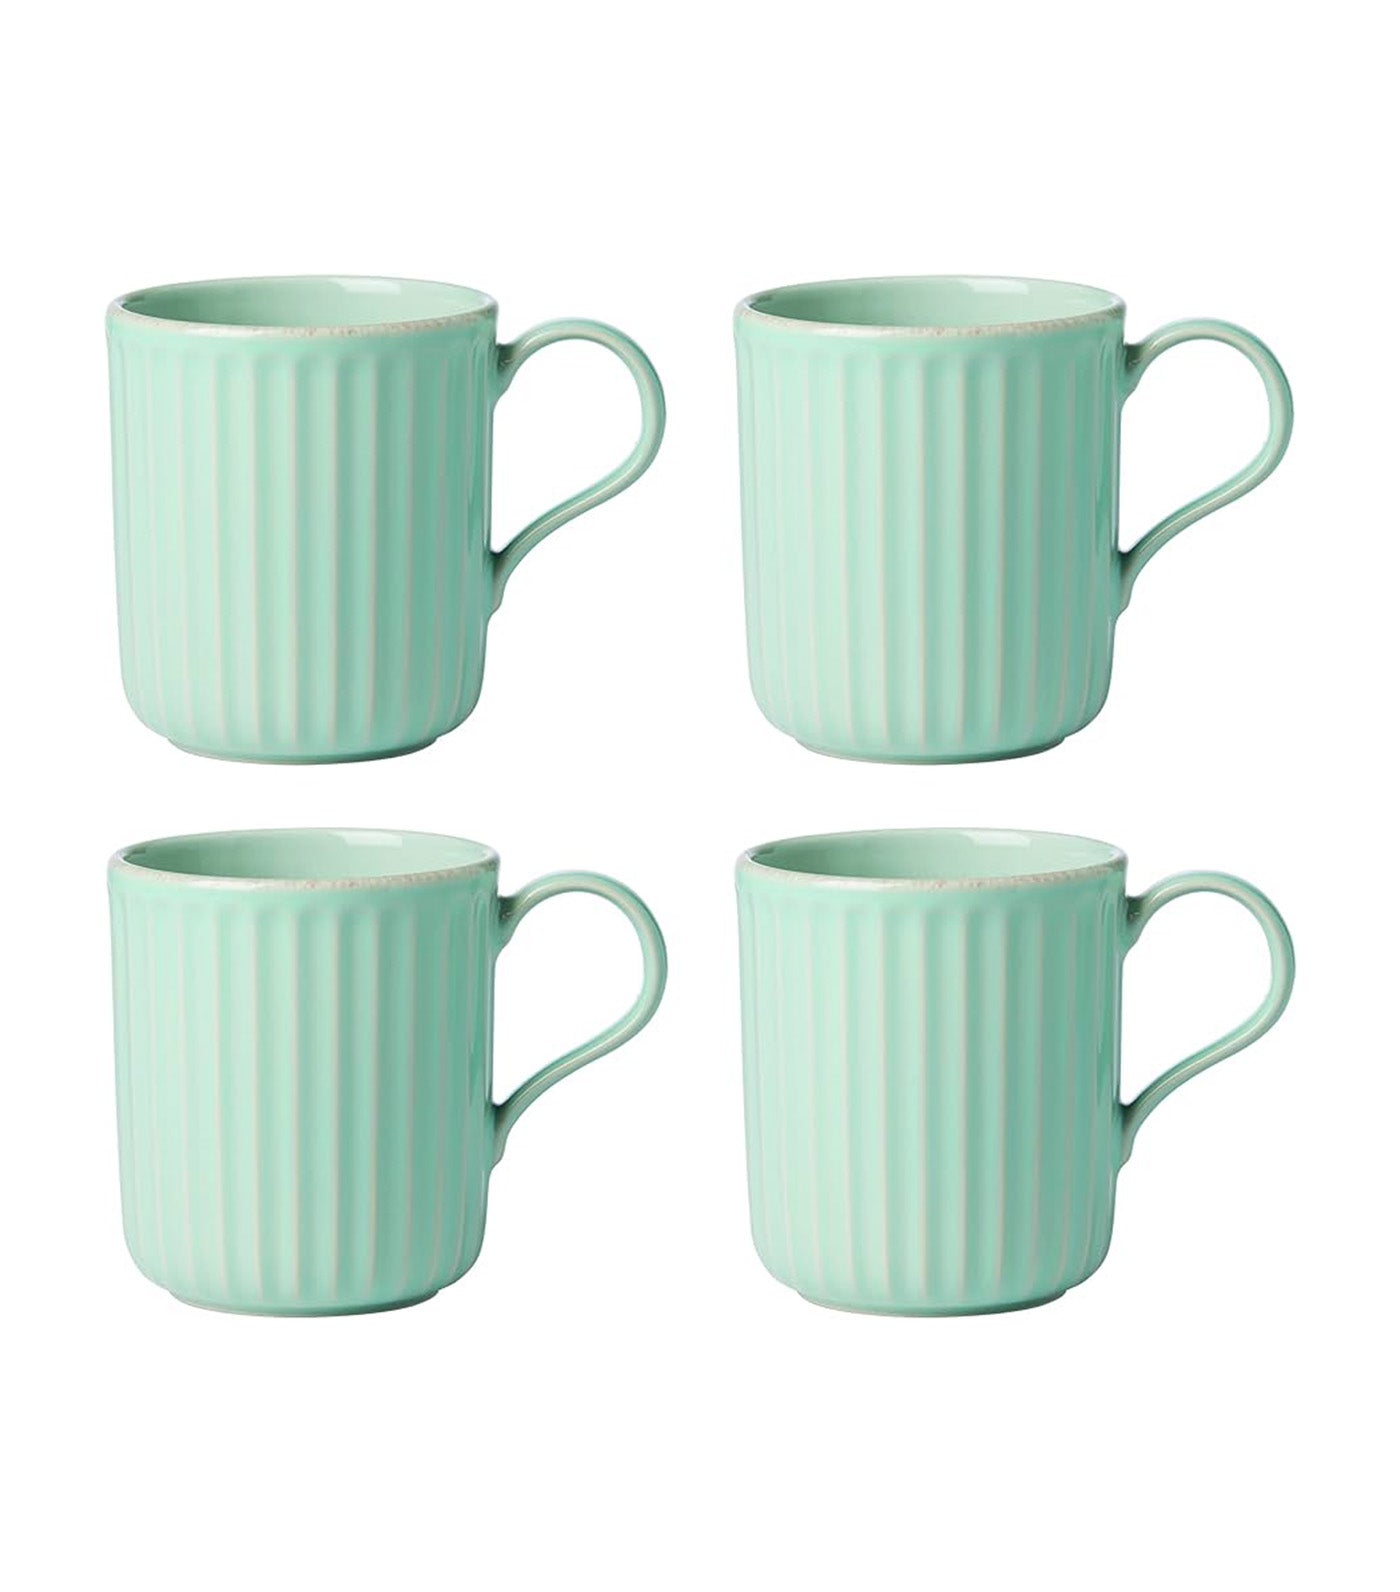 Lenox French Perle Scallop Dinnerware Collection - Ice Blue